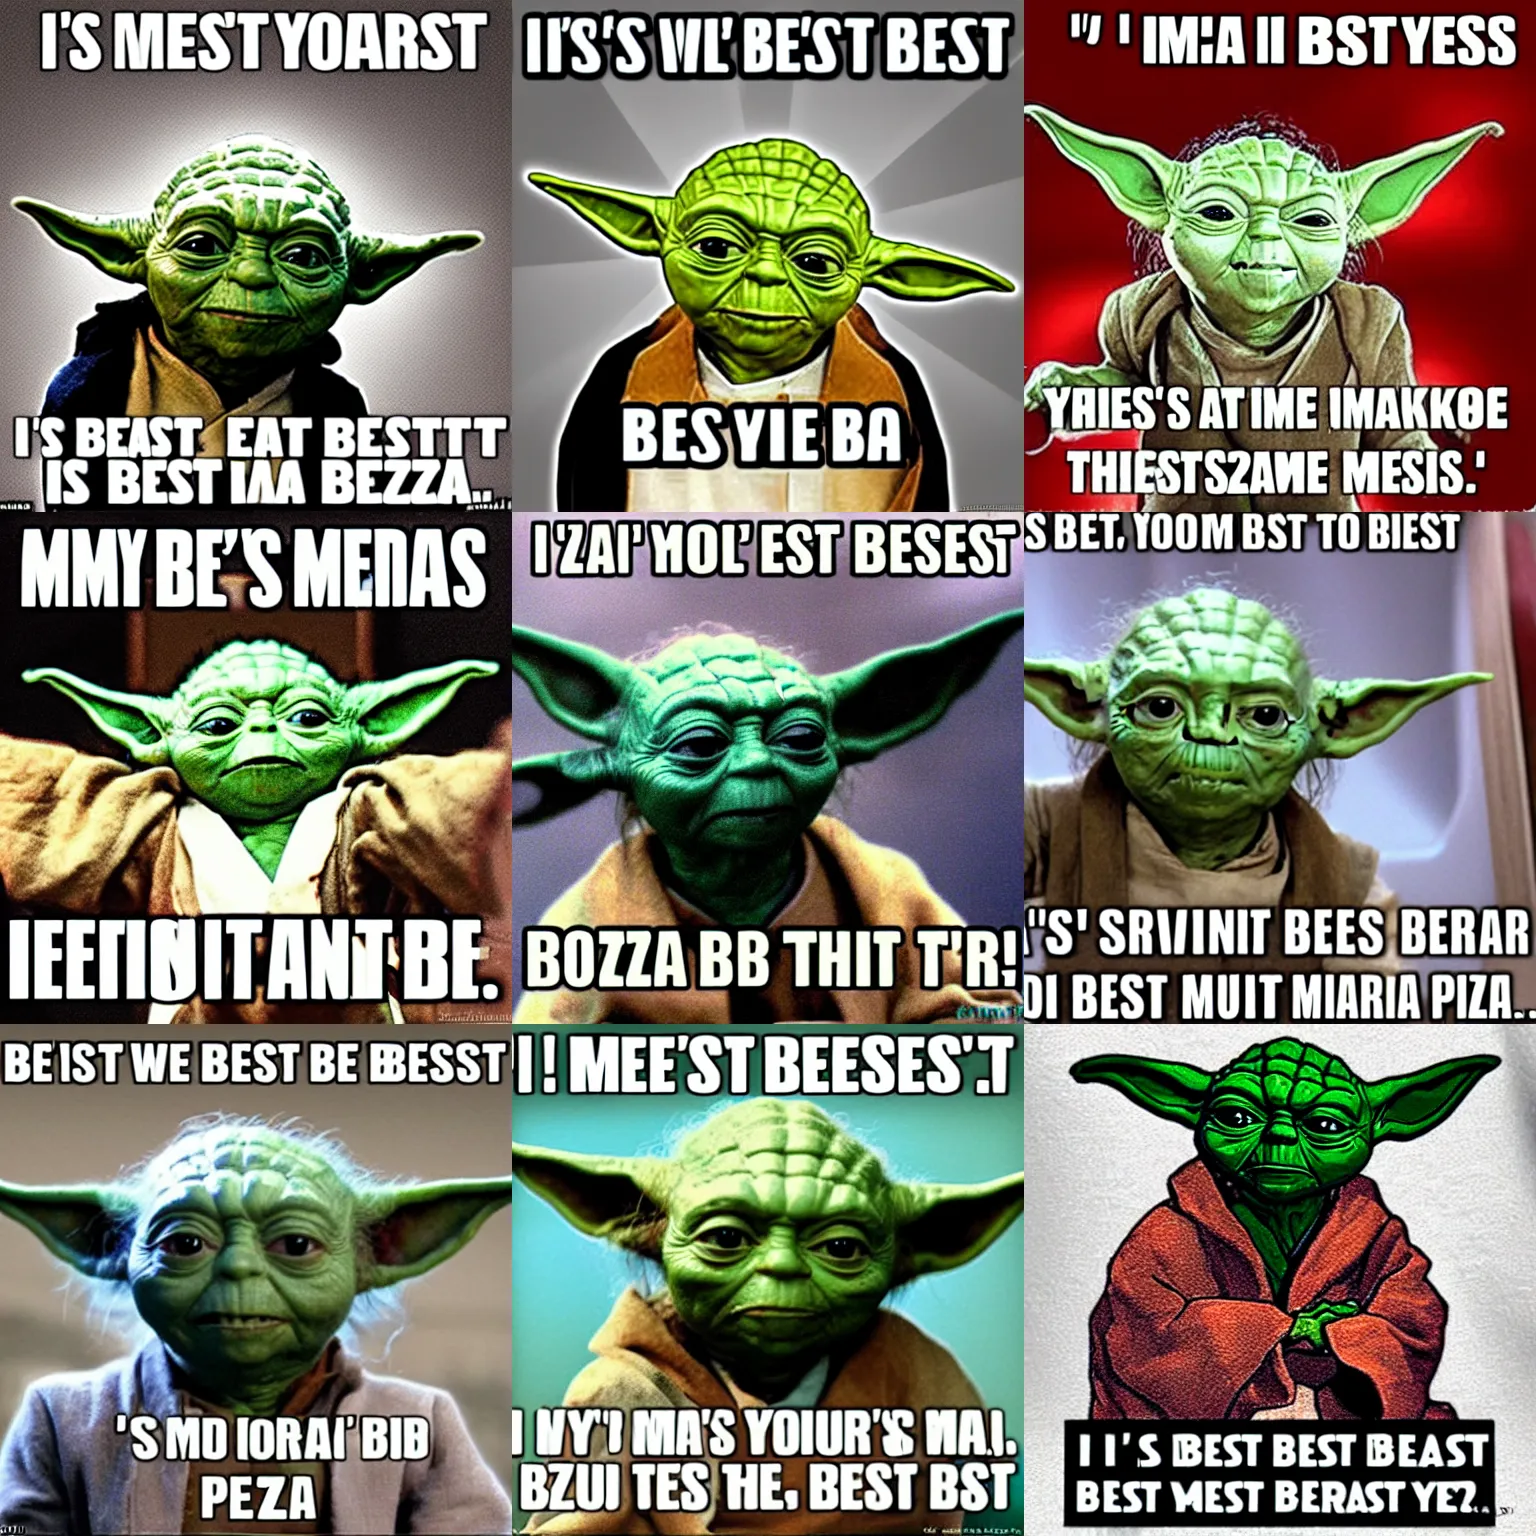 Prompt: i'm yoda and i make the best pizza, jesus christ!